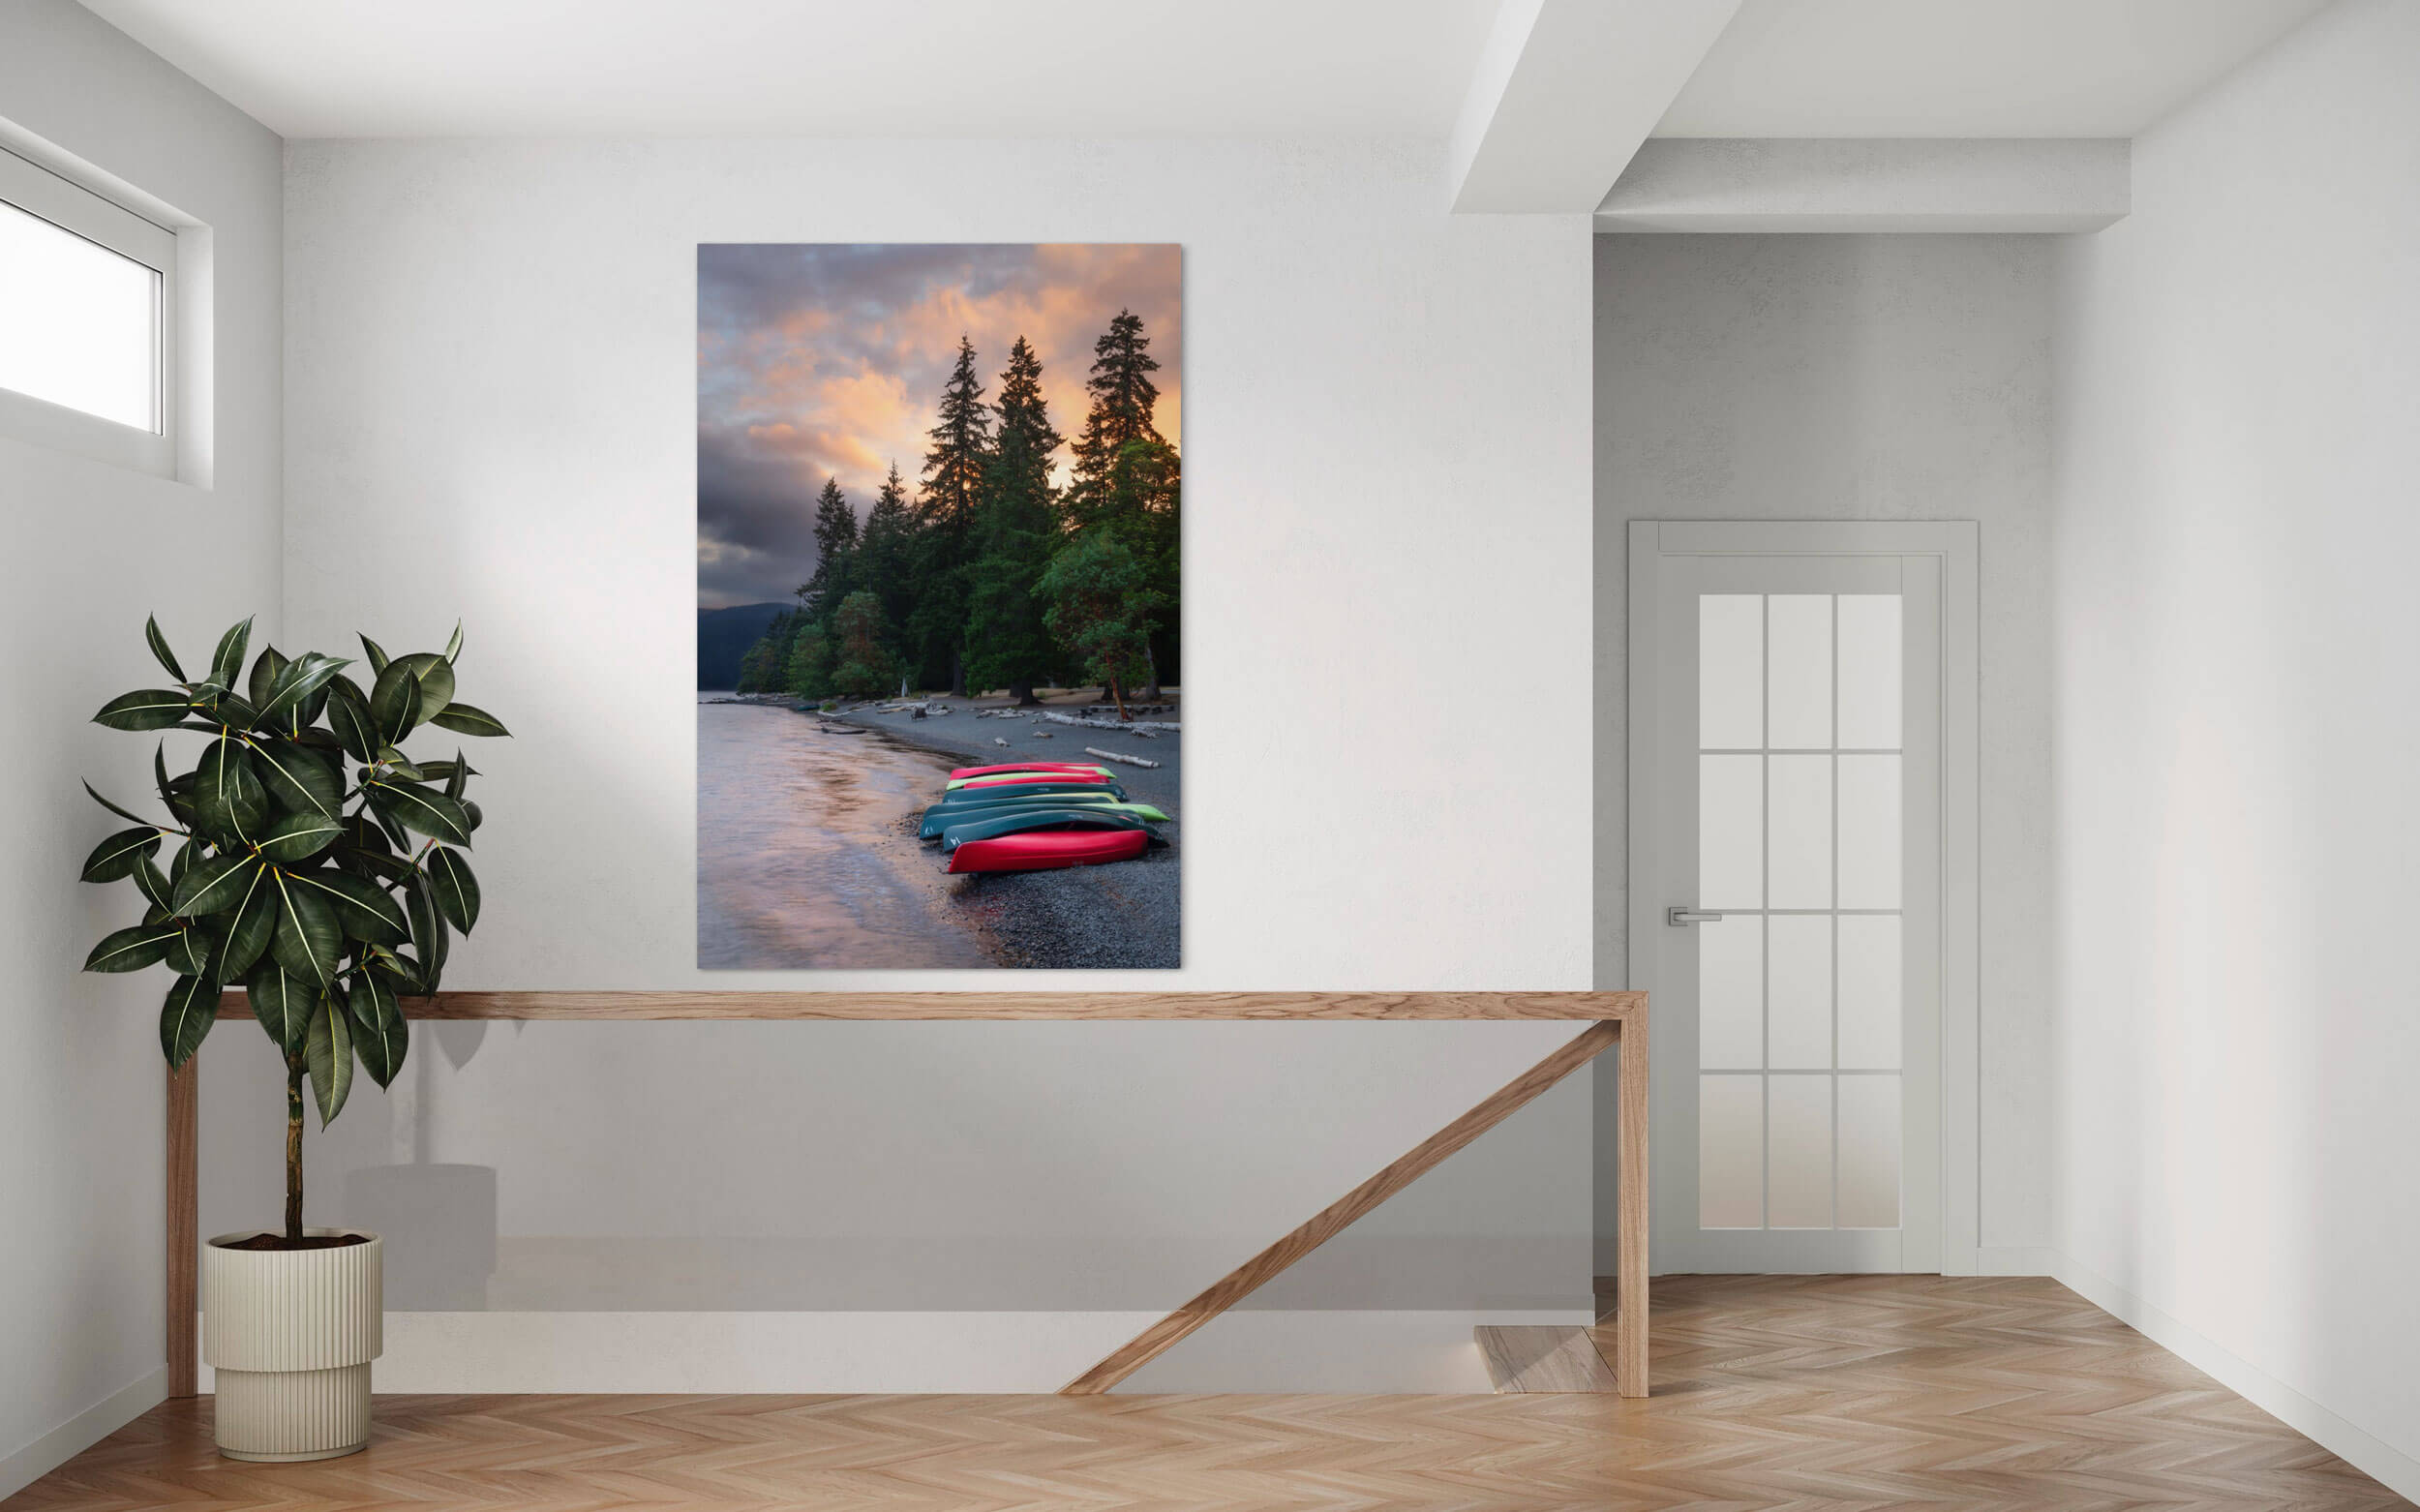 A Crescent Lake picture from Washington hangs in a hallway.